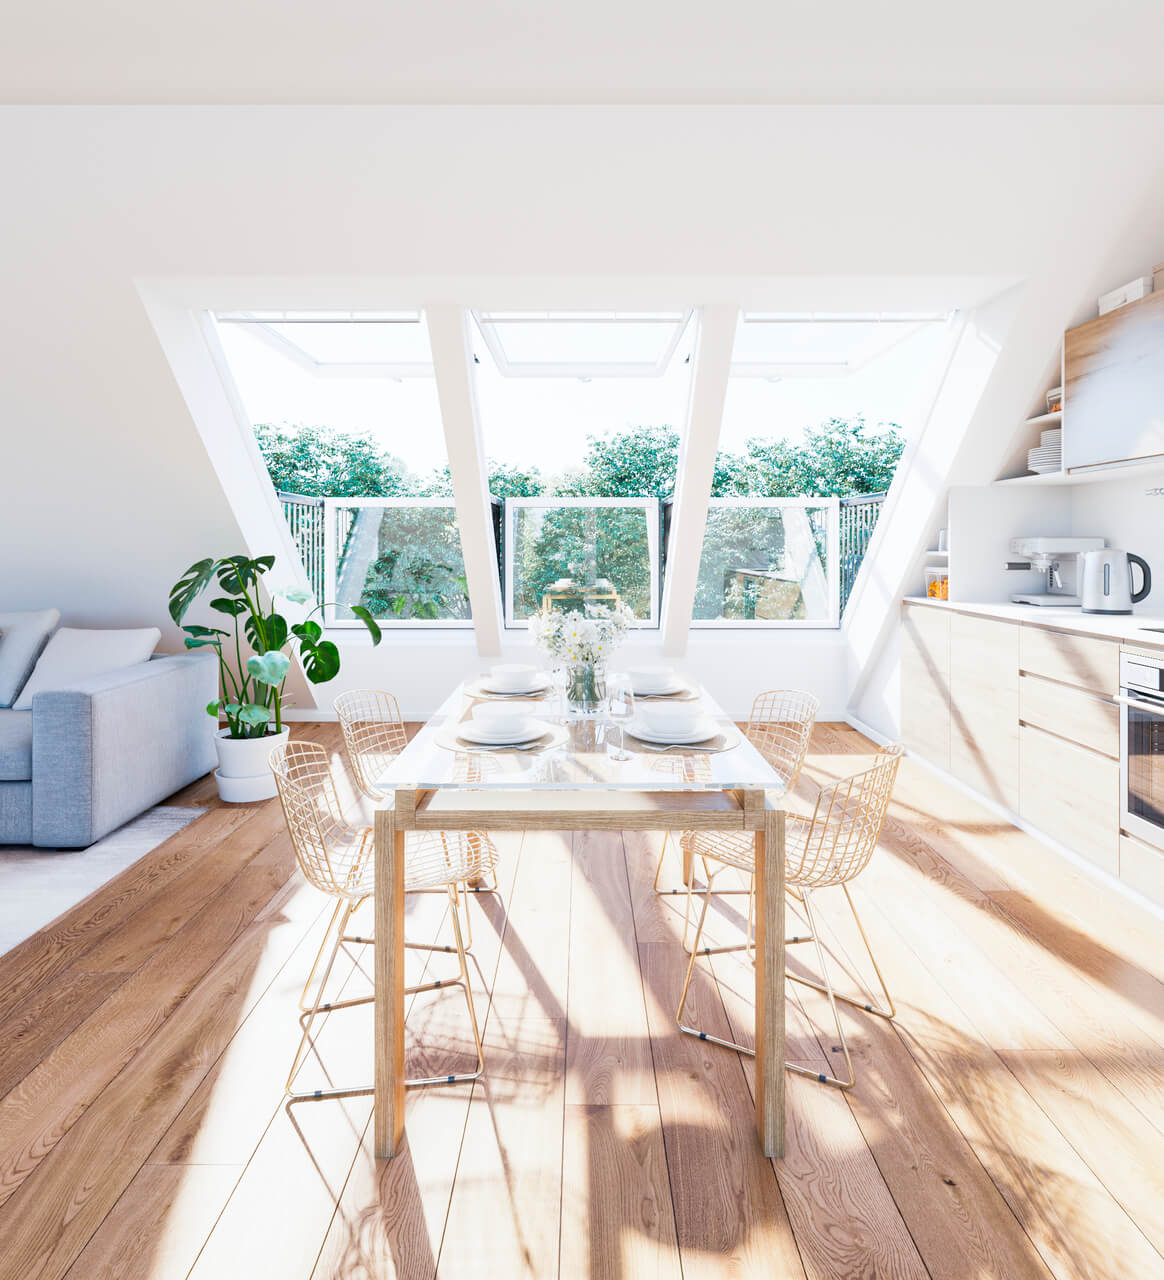 Modern dining room with natural light from VELUX roof windows, wooden floor, and contemporary setup.